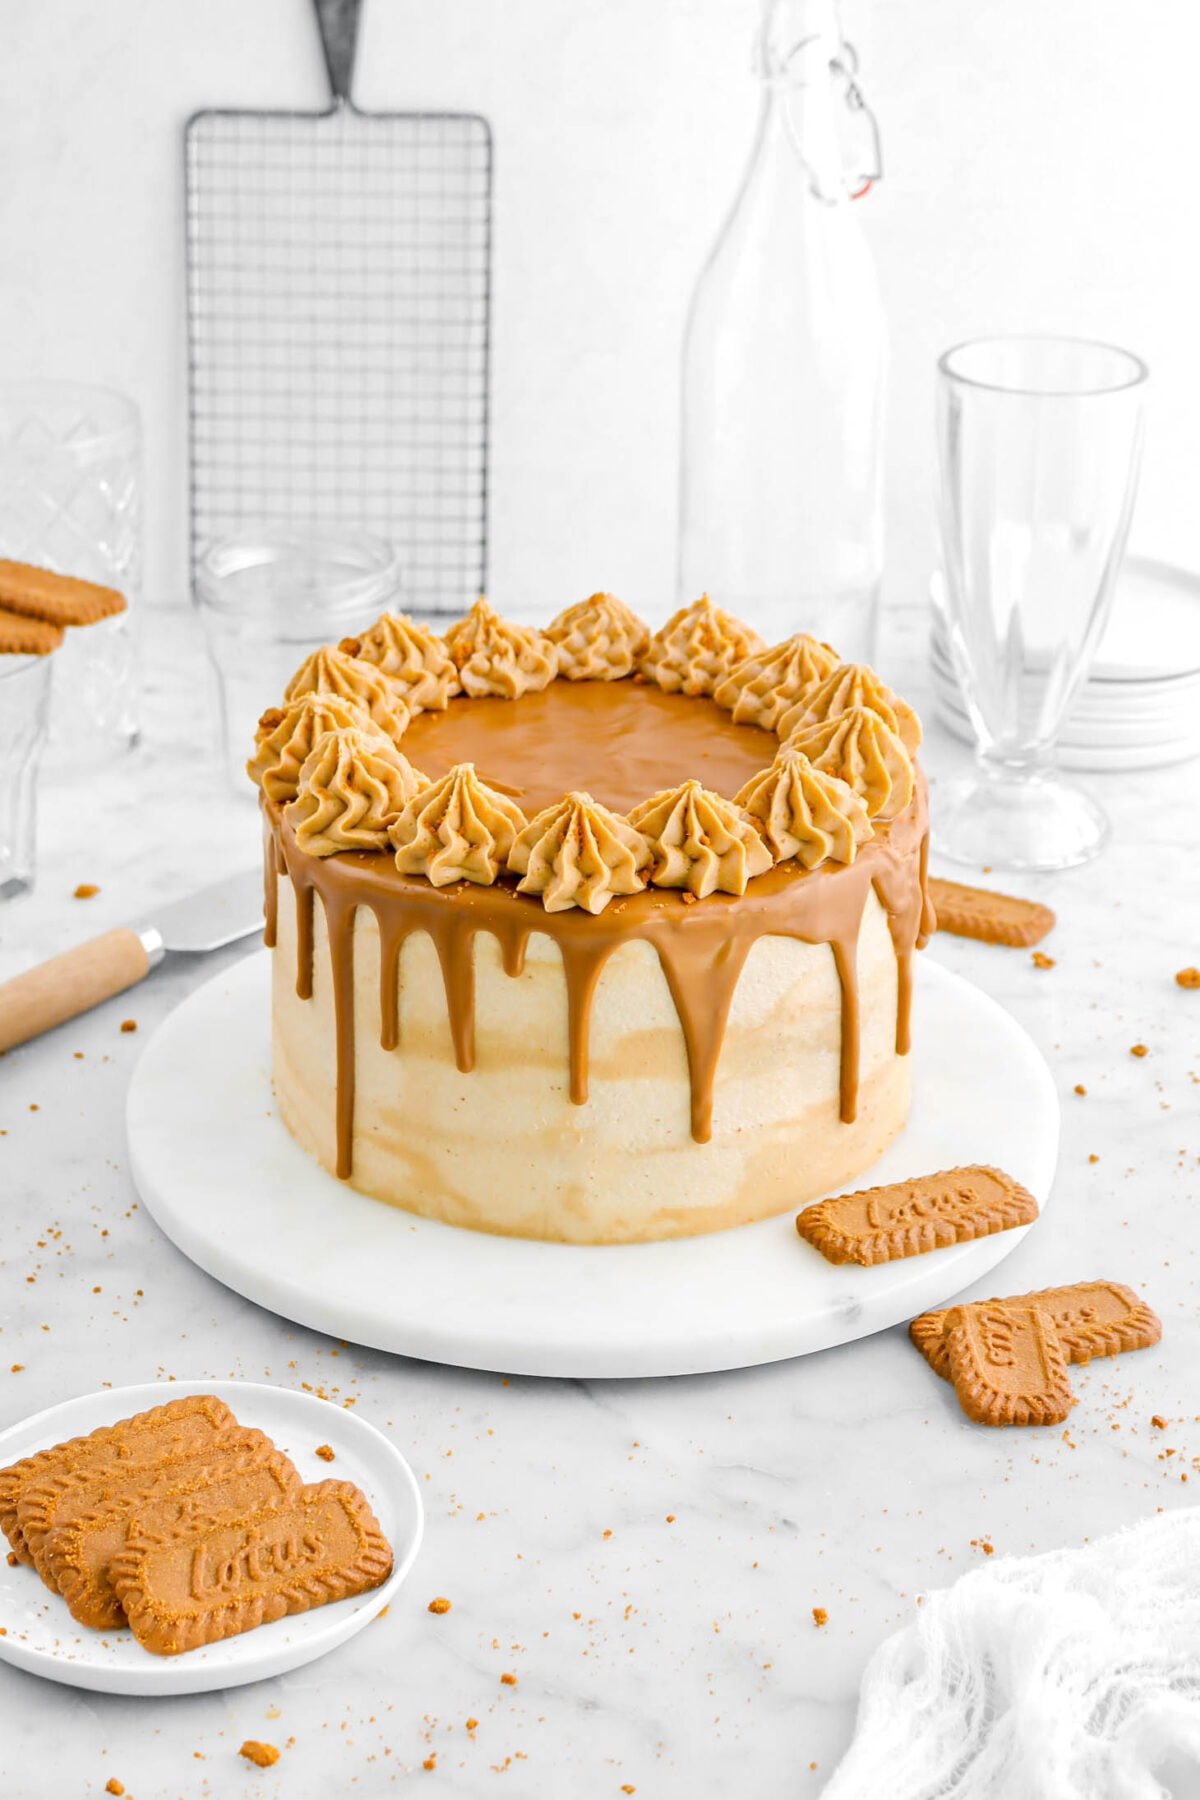 angled shot of cookie butter cake on marble plate with biscoff cookies around, a wood handled spatula, and glasses behind.